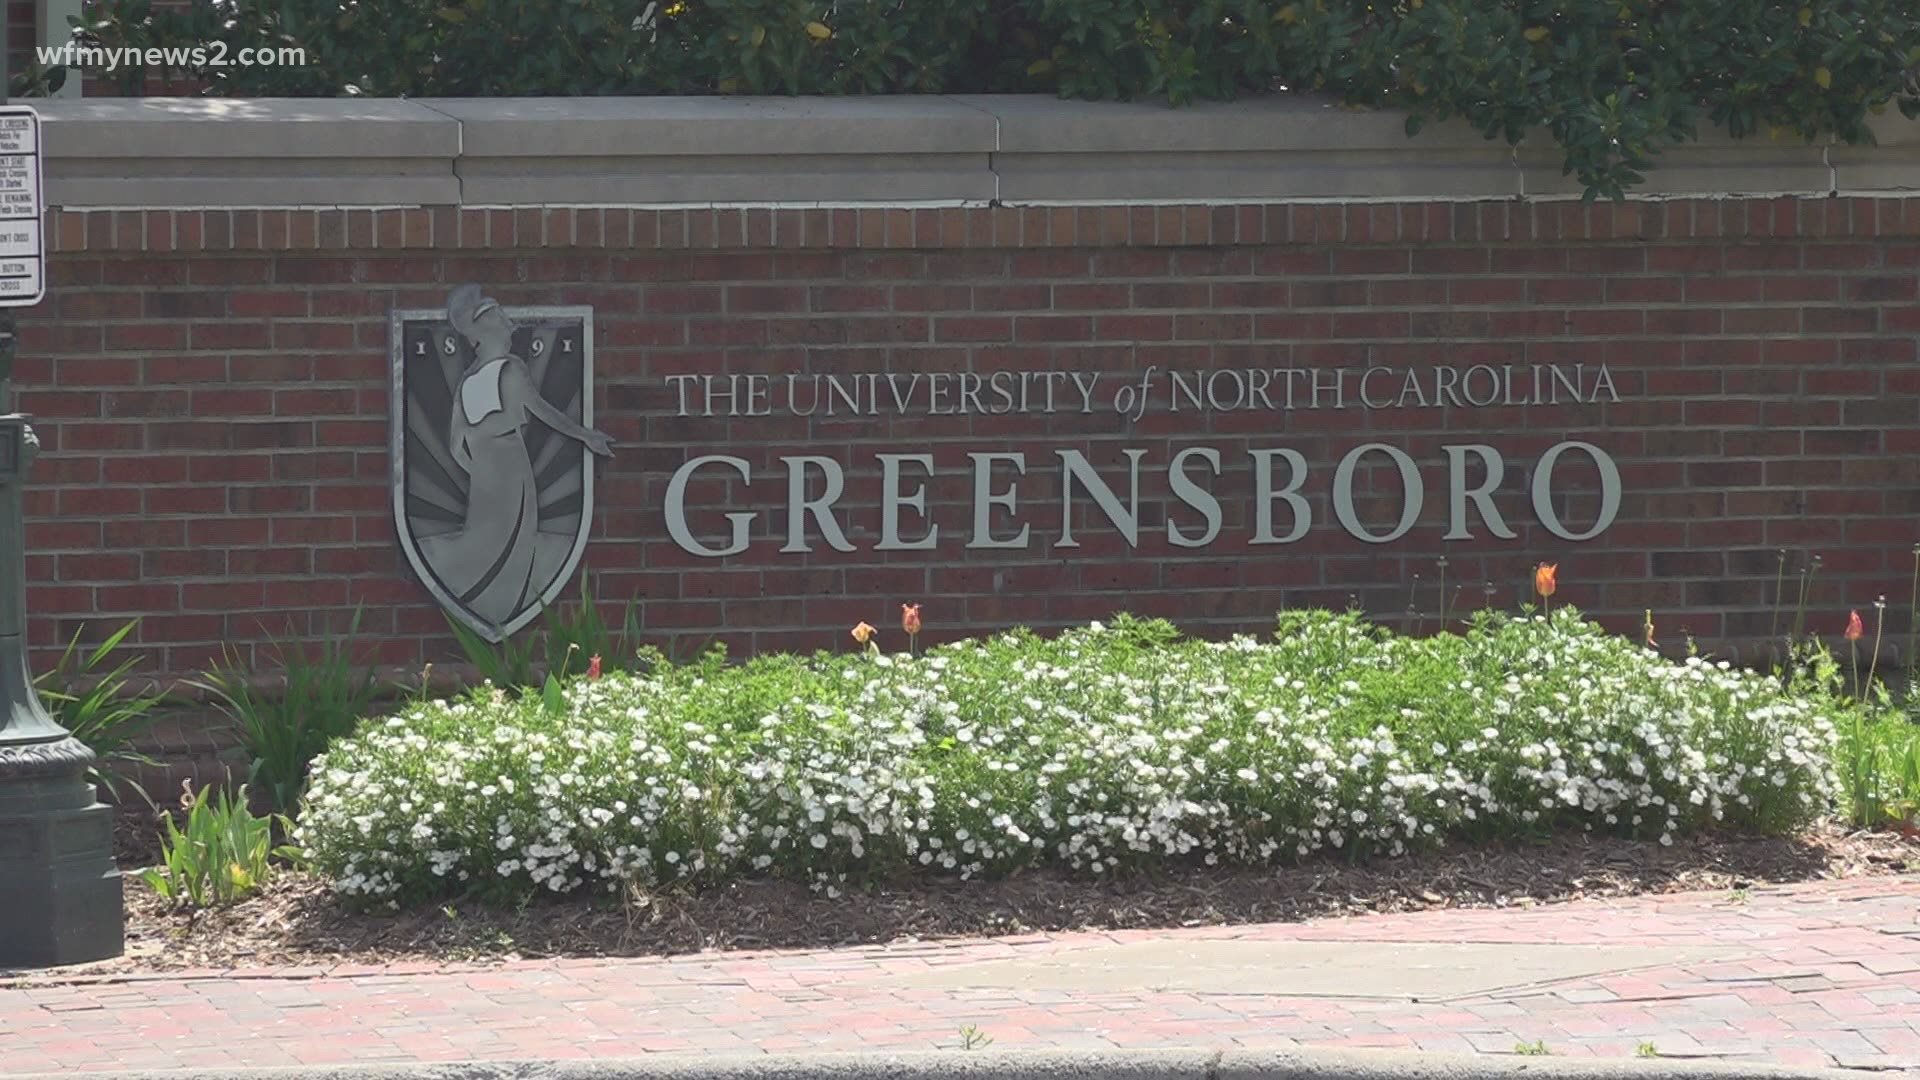 UNCG announced it will add Computer Science to the already impressive list of Phd programs.